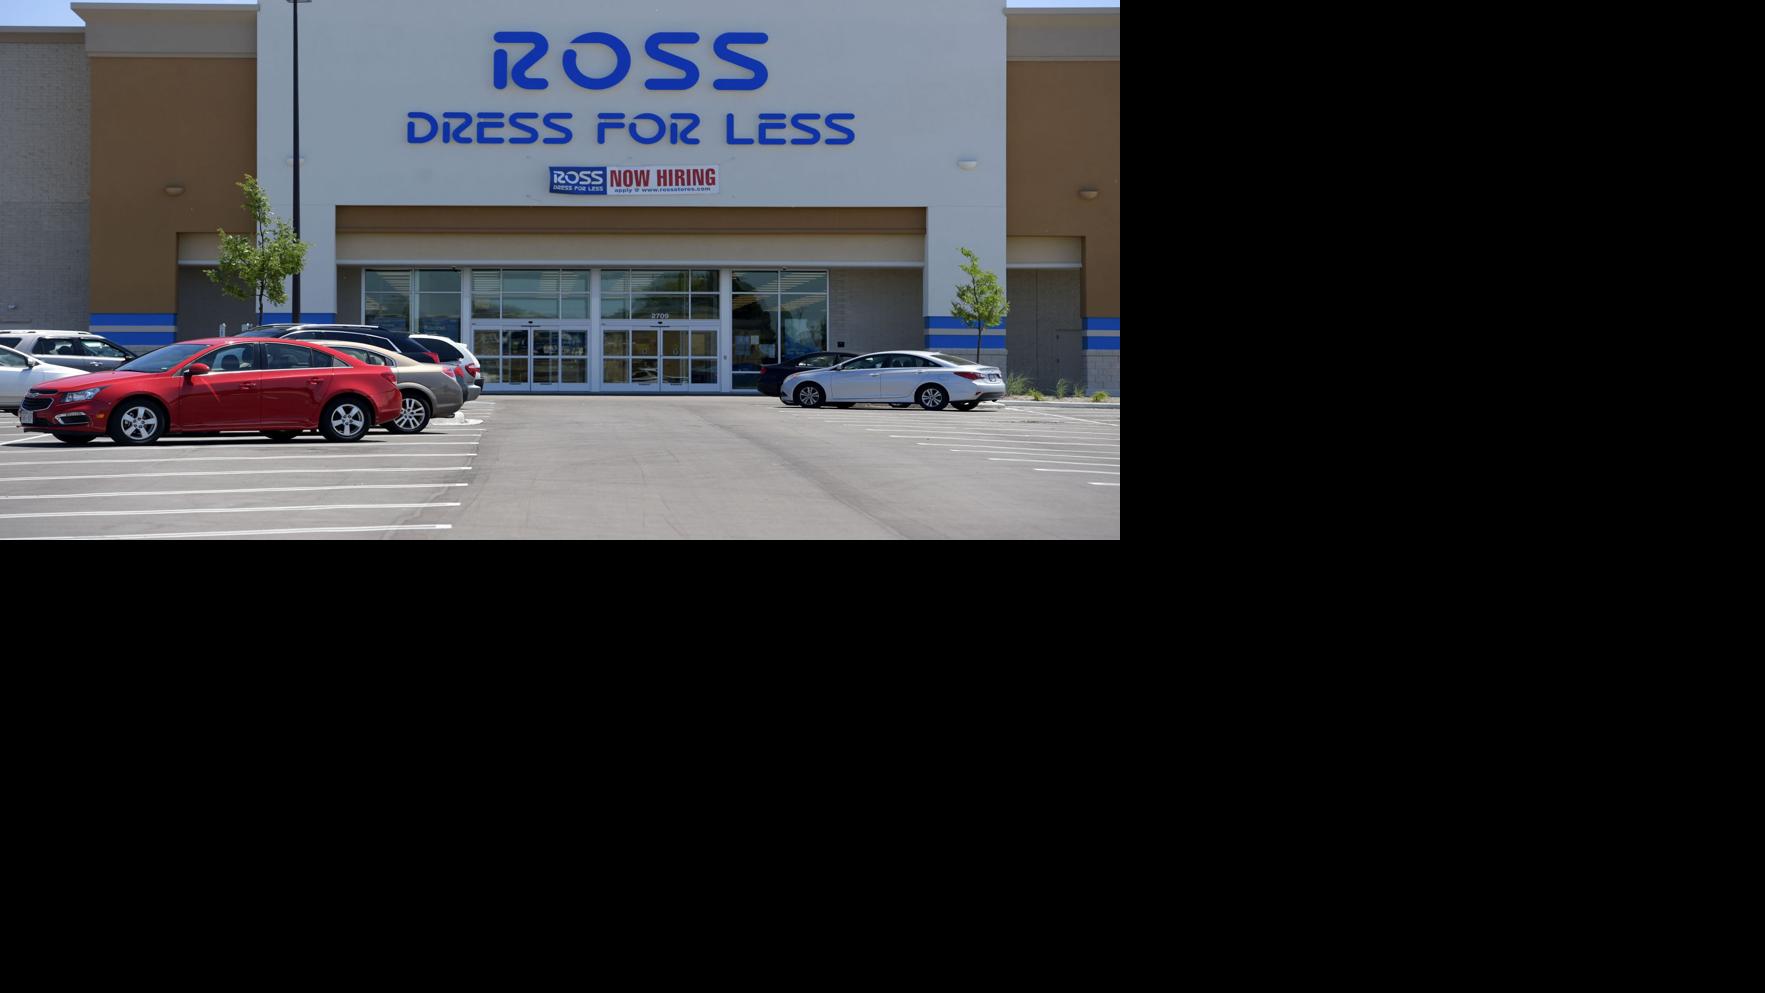 Ross Dress for Less opens at mall Friday Money